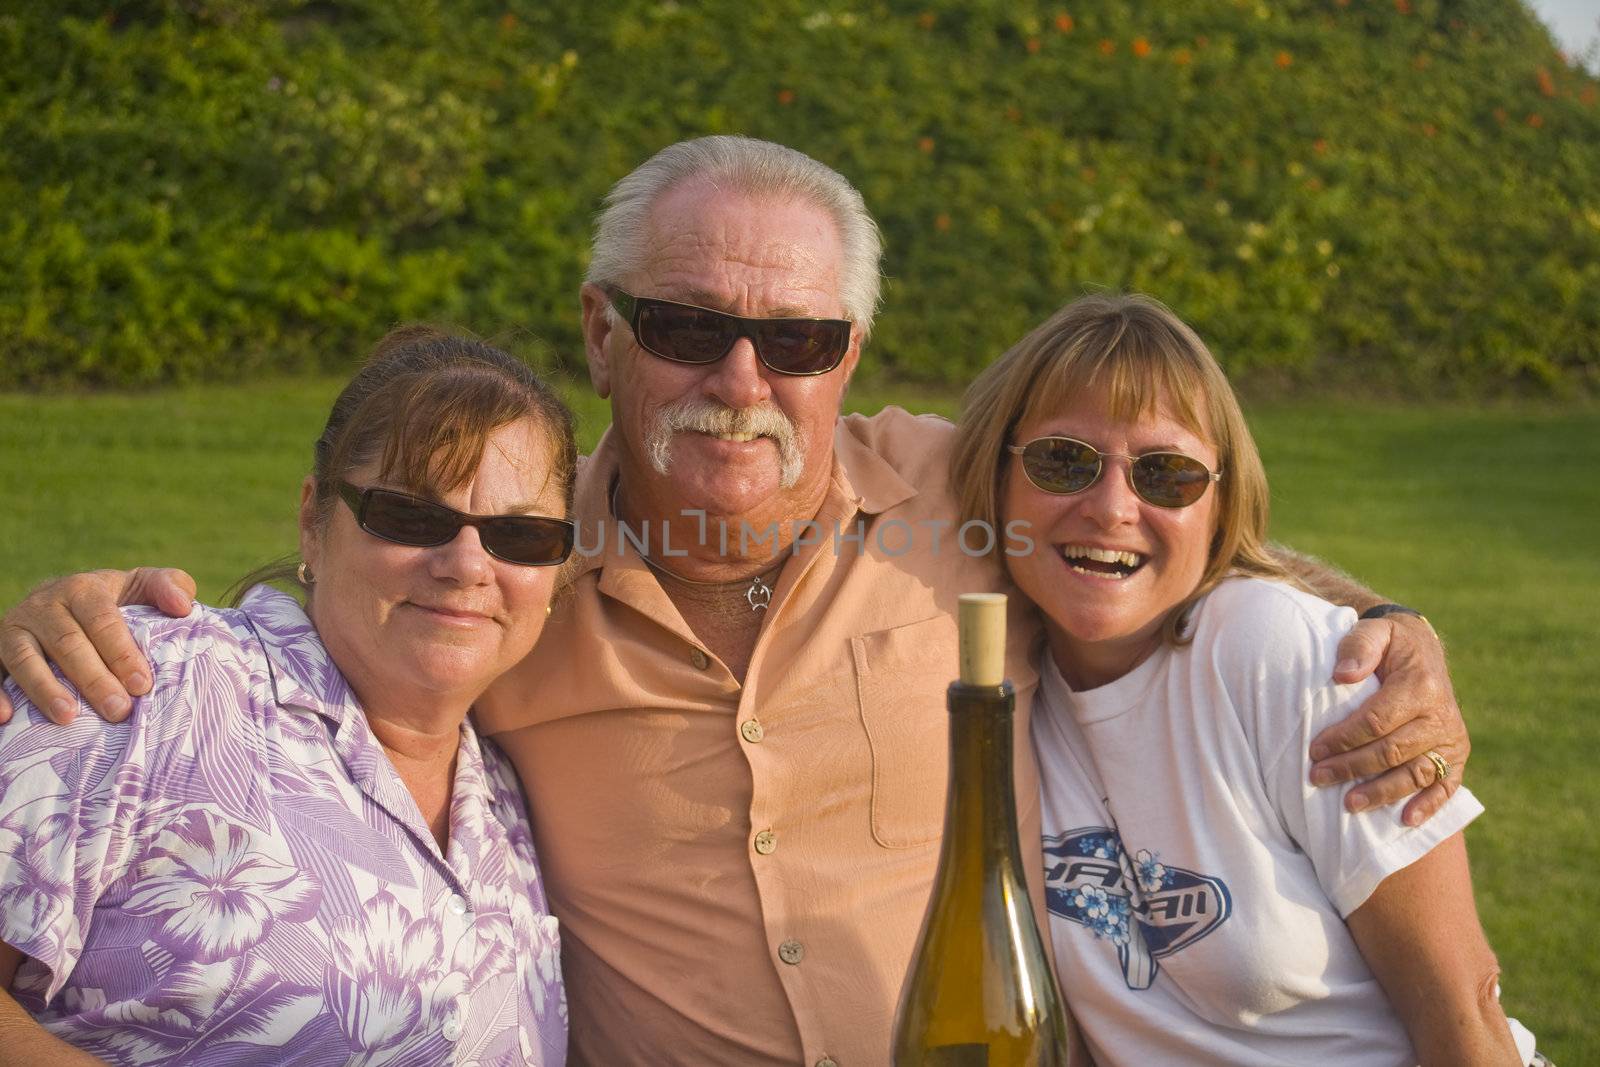 Friends enjoy an outdoor Picnic and a Bottle of Wine